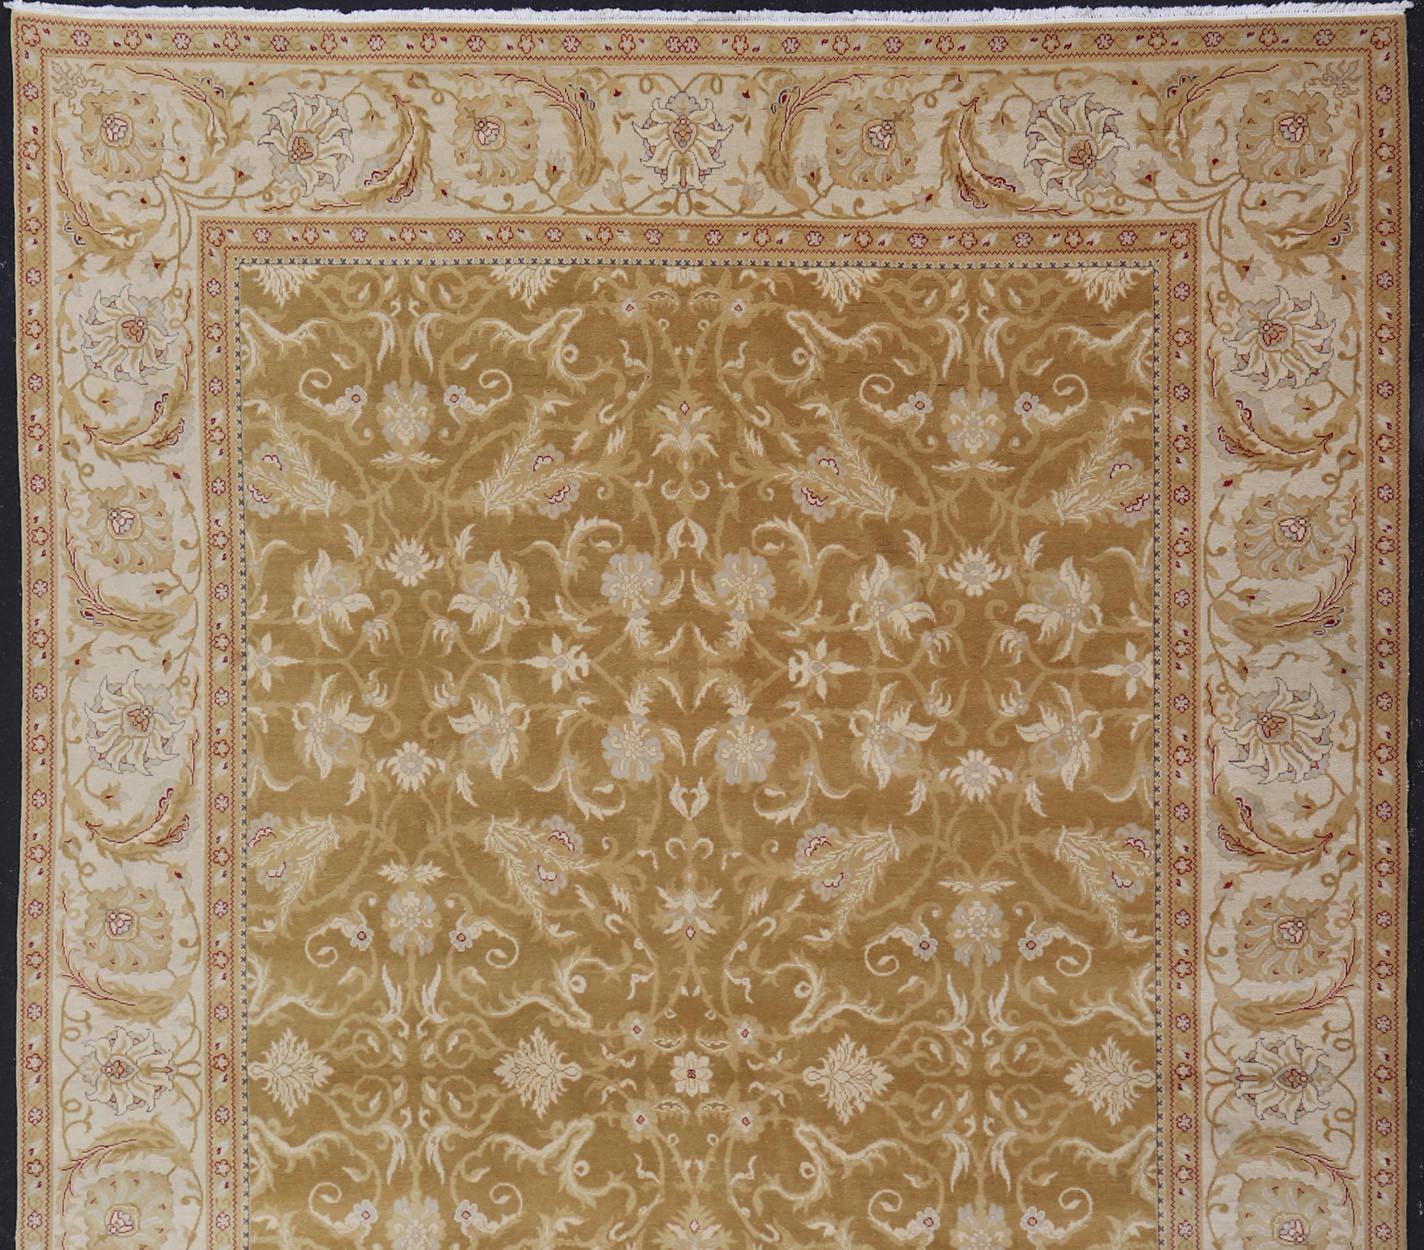 This beautiful hand-knotted woolen Amritsar rug features a floral design enclosed within a complementary all-over design. The Rug consists of a greenish-tan background, with accents in Ivory, Cream, Red and Gray-blue. Keivan Woven Arts /